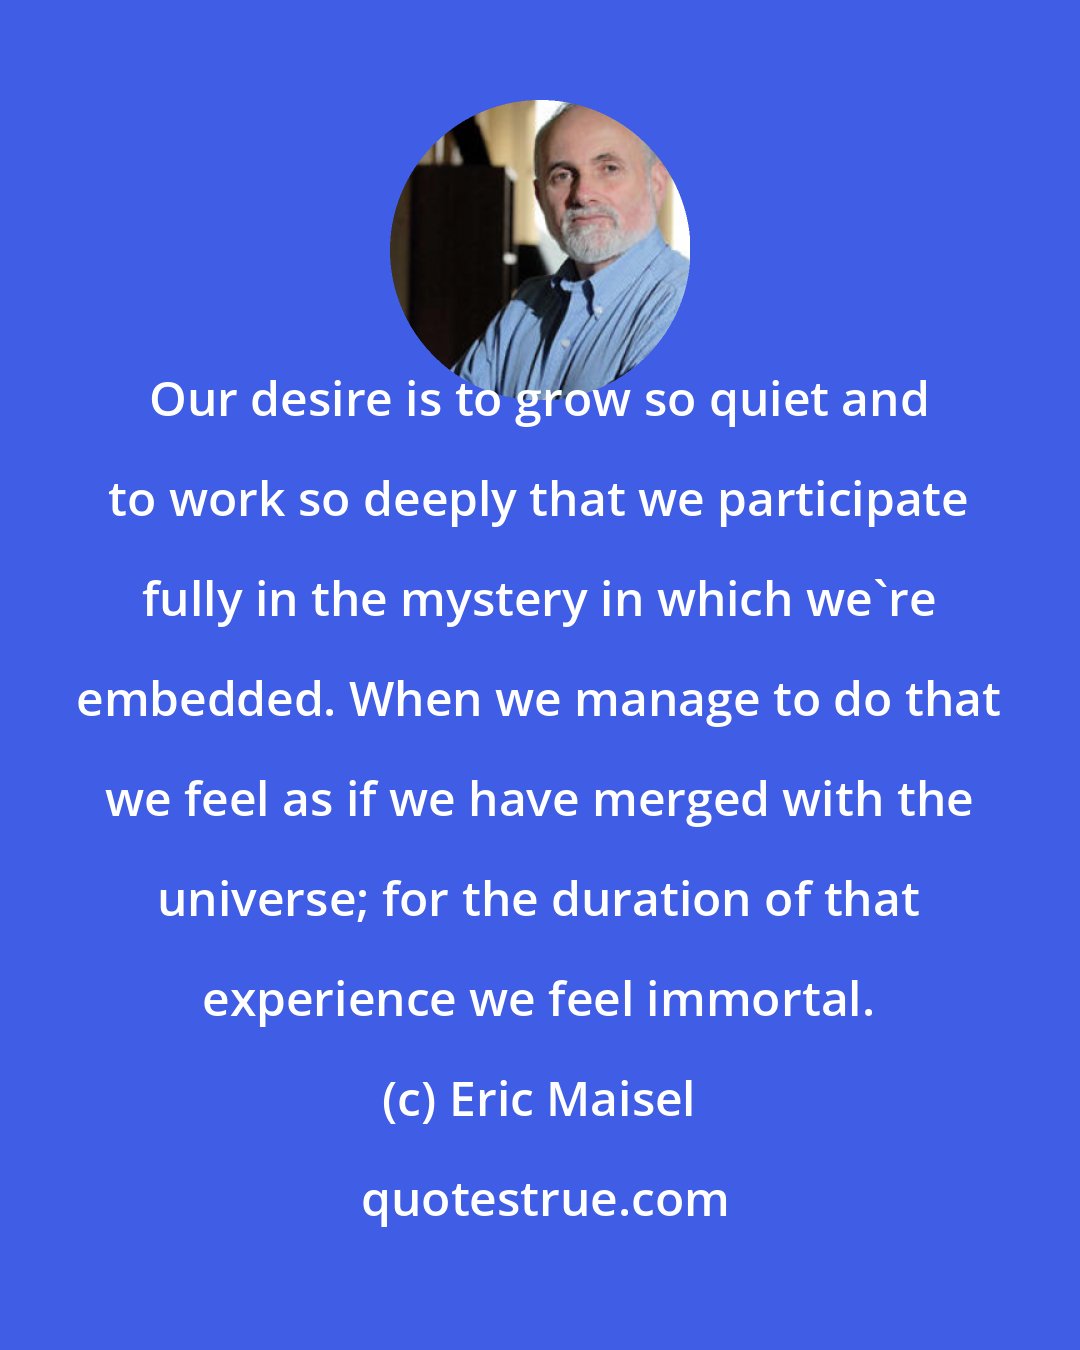 Eric Maisel: Our desire is to grow so quiet and to work so deeply that we participate fully in the mystery in which we're embedded. When we manage to do that we feel as if we have merged with the universe; for the duration of that experience we feel immortal.